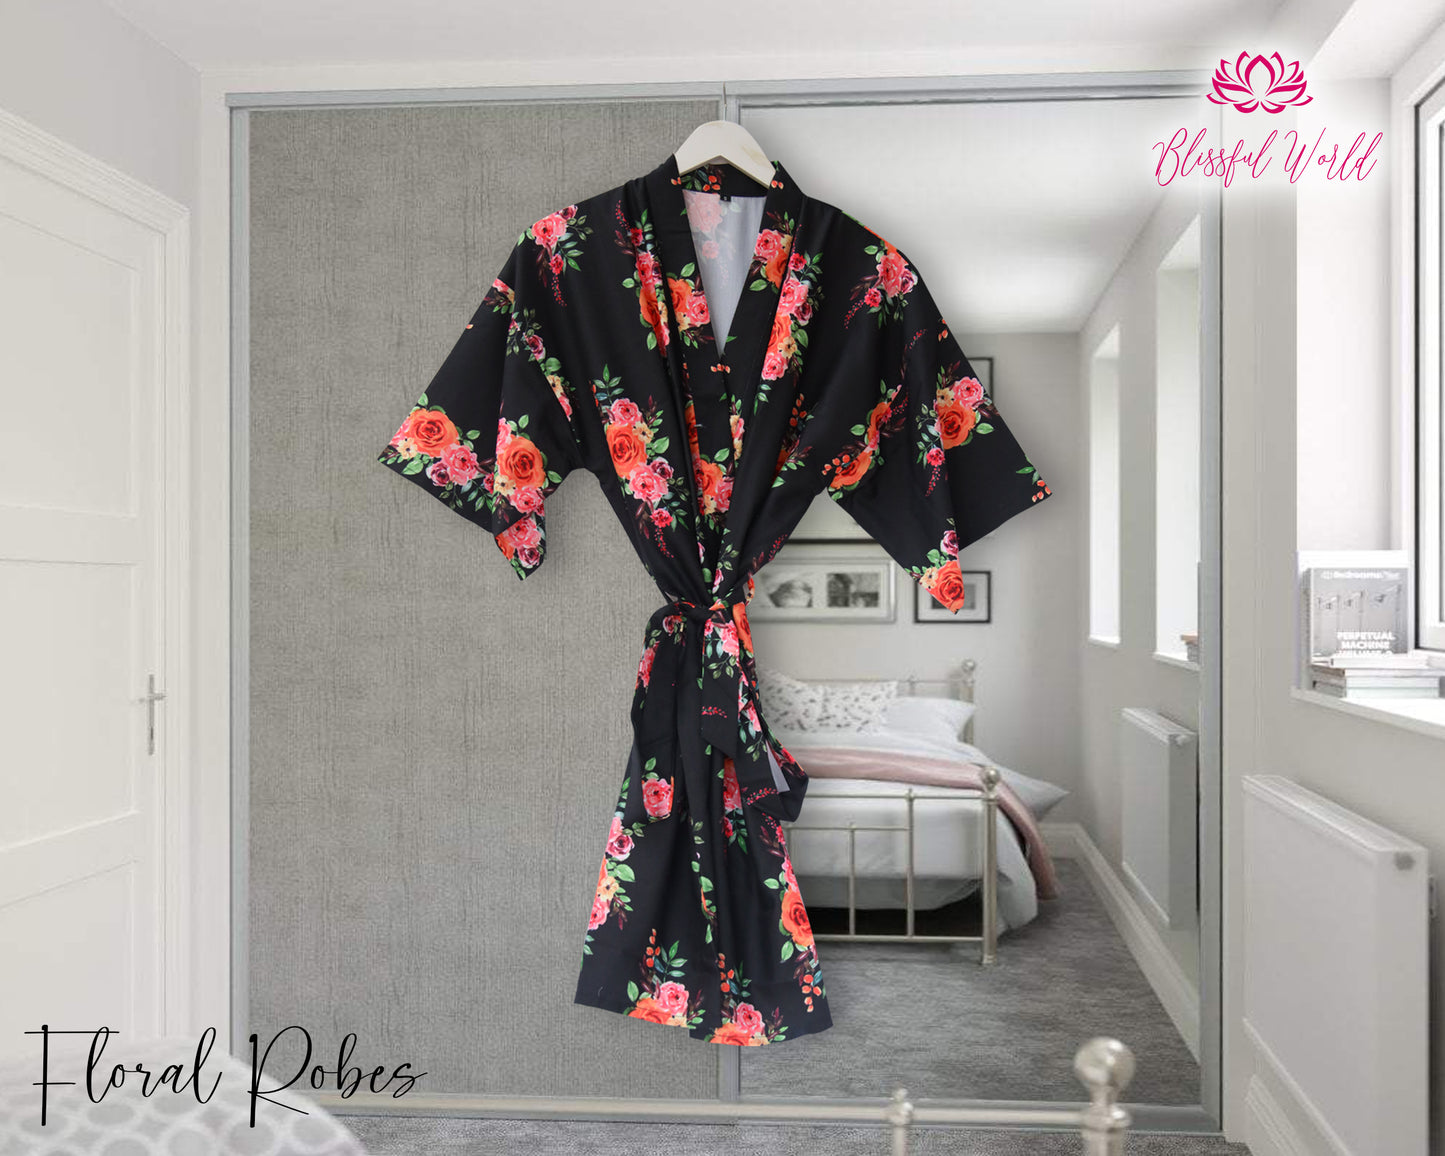 Robe, Personalized Robes, Custom Text, Floral Kimono, Floral Robes, Bridal Party, Wedding Robes, Satin Robe, Print Robes, Floral satin Robe